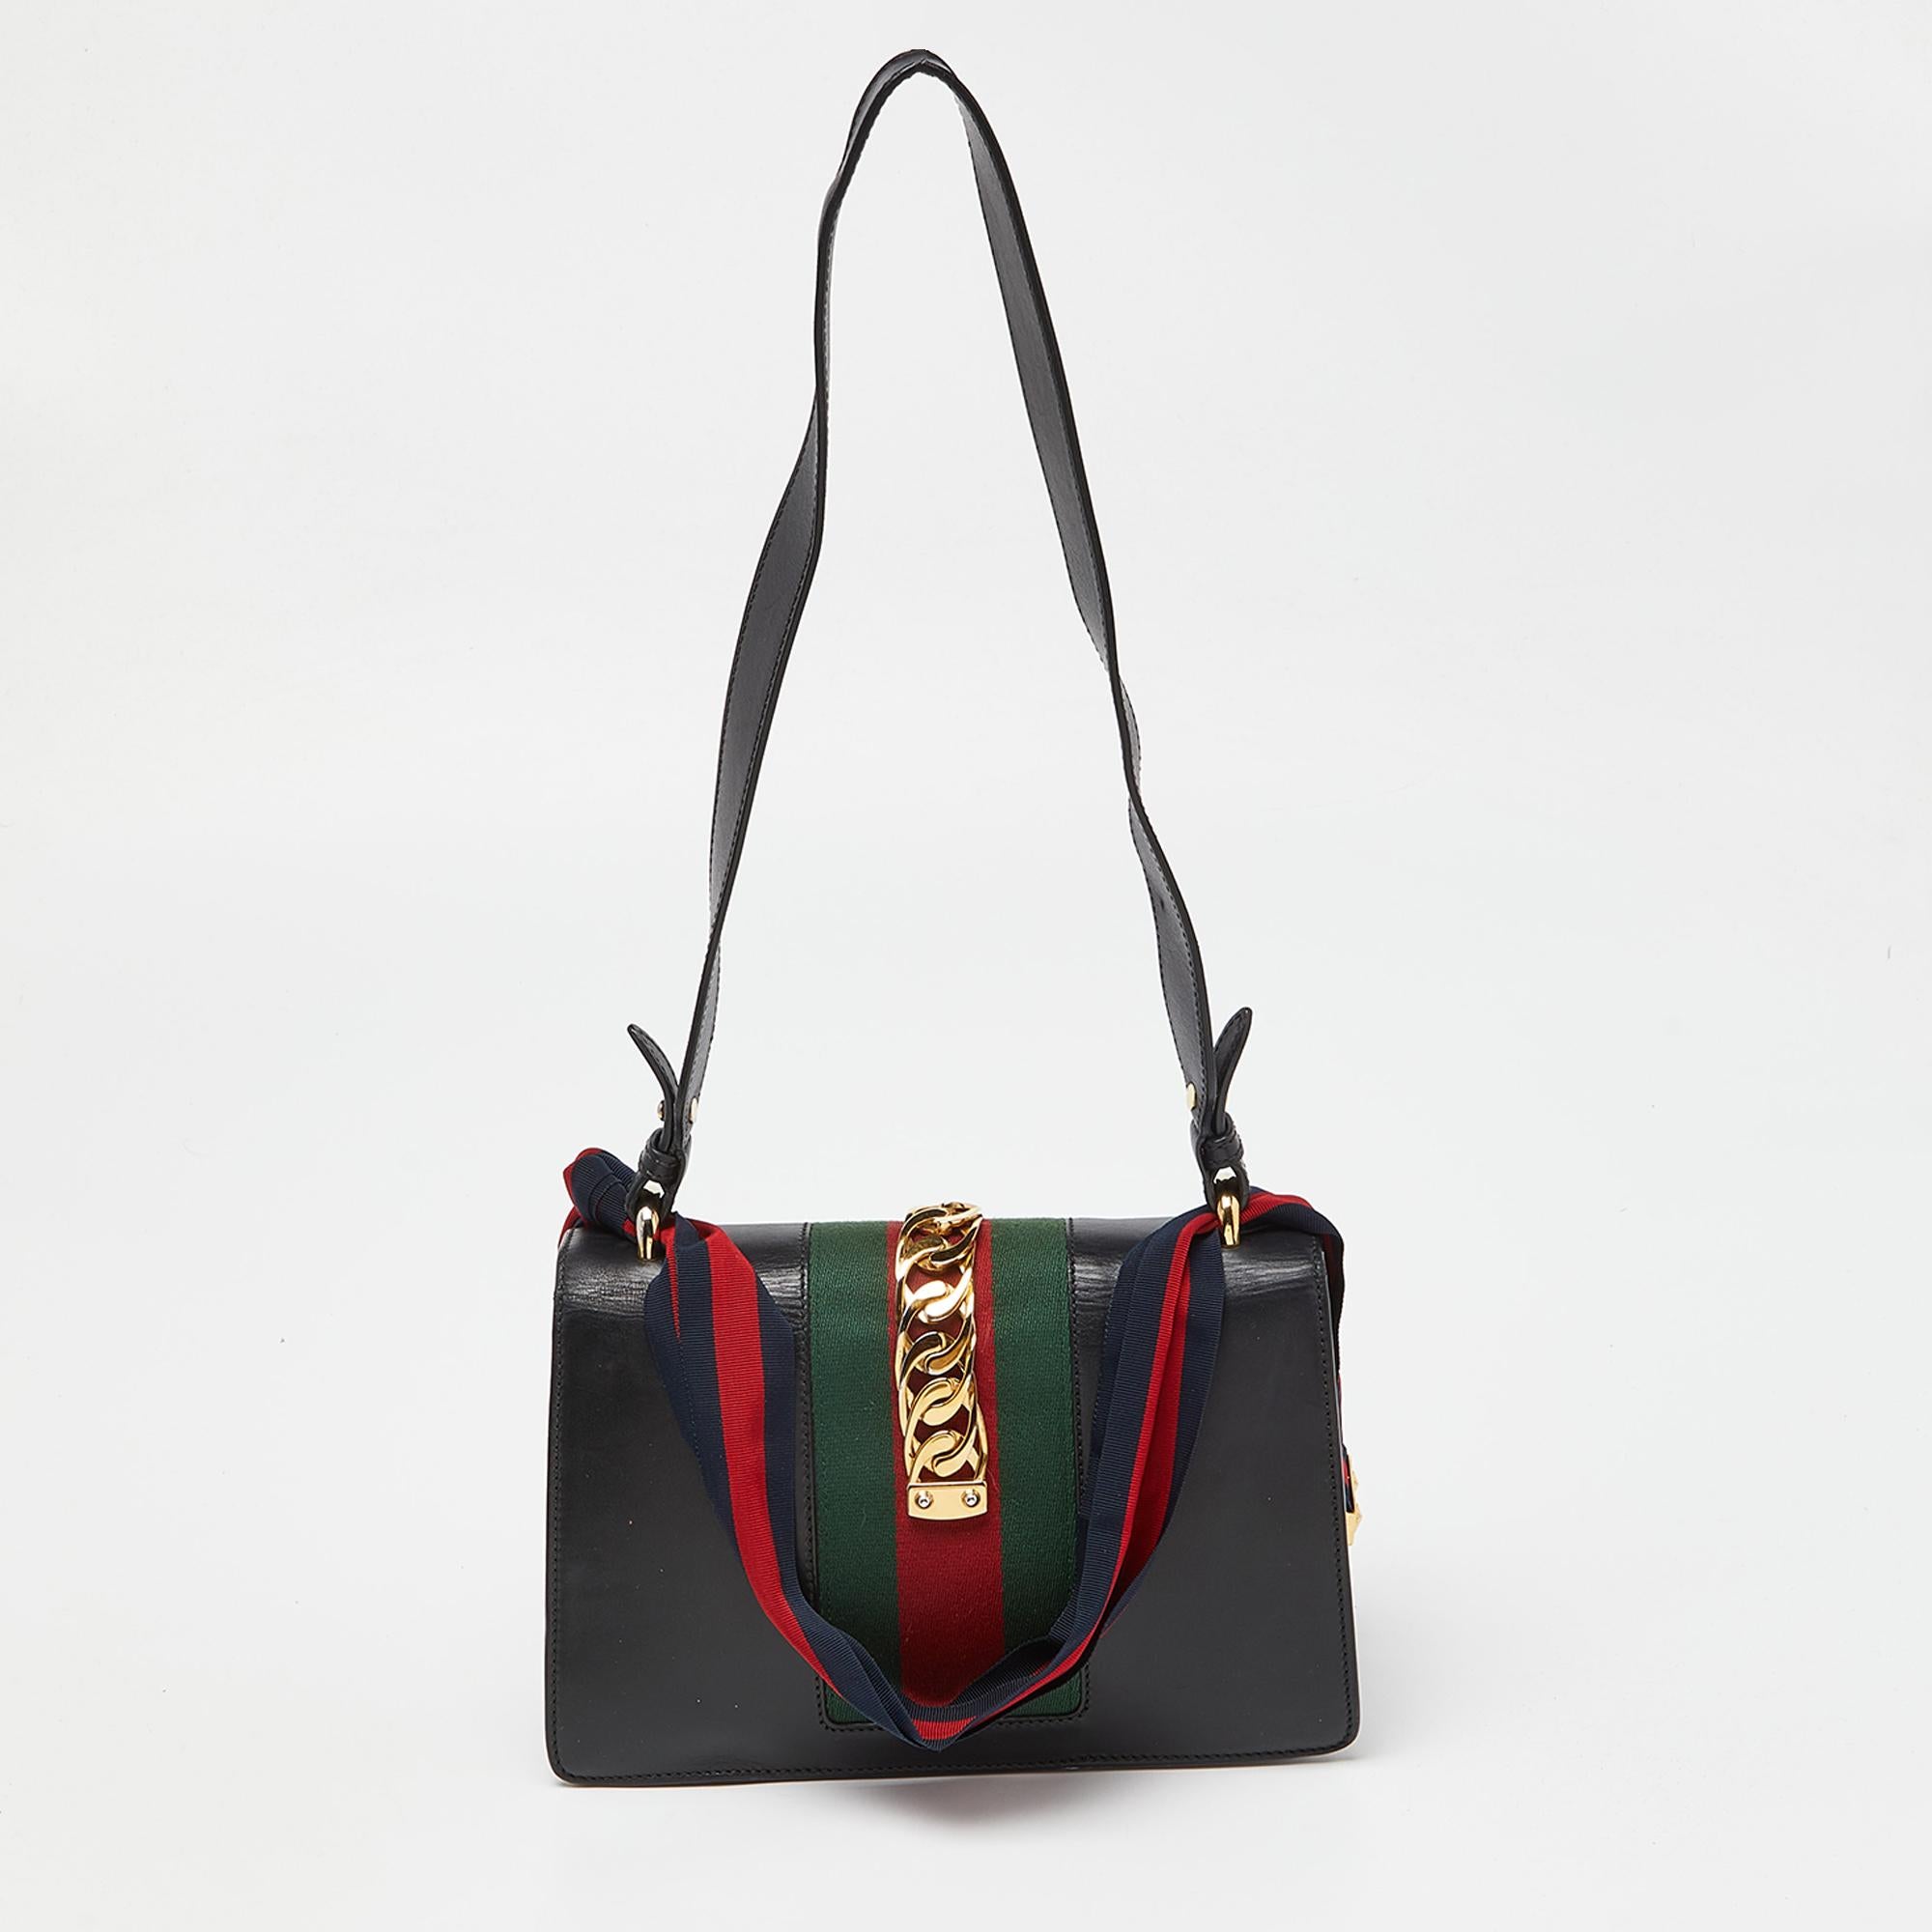 Indulge in luxury with this Gucci bag. Meticulously crafted from premium materials, it combines exquisite design, impeccable craftsmanship, and timeless elegance. Elevate your style with this fashion accessory.

Includes: Original Dustbag, Info